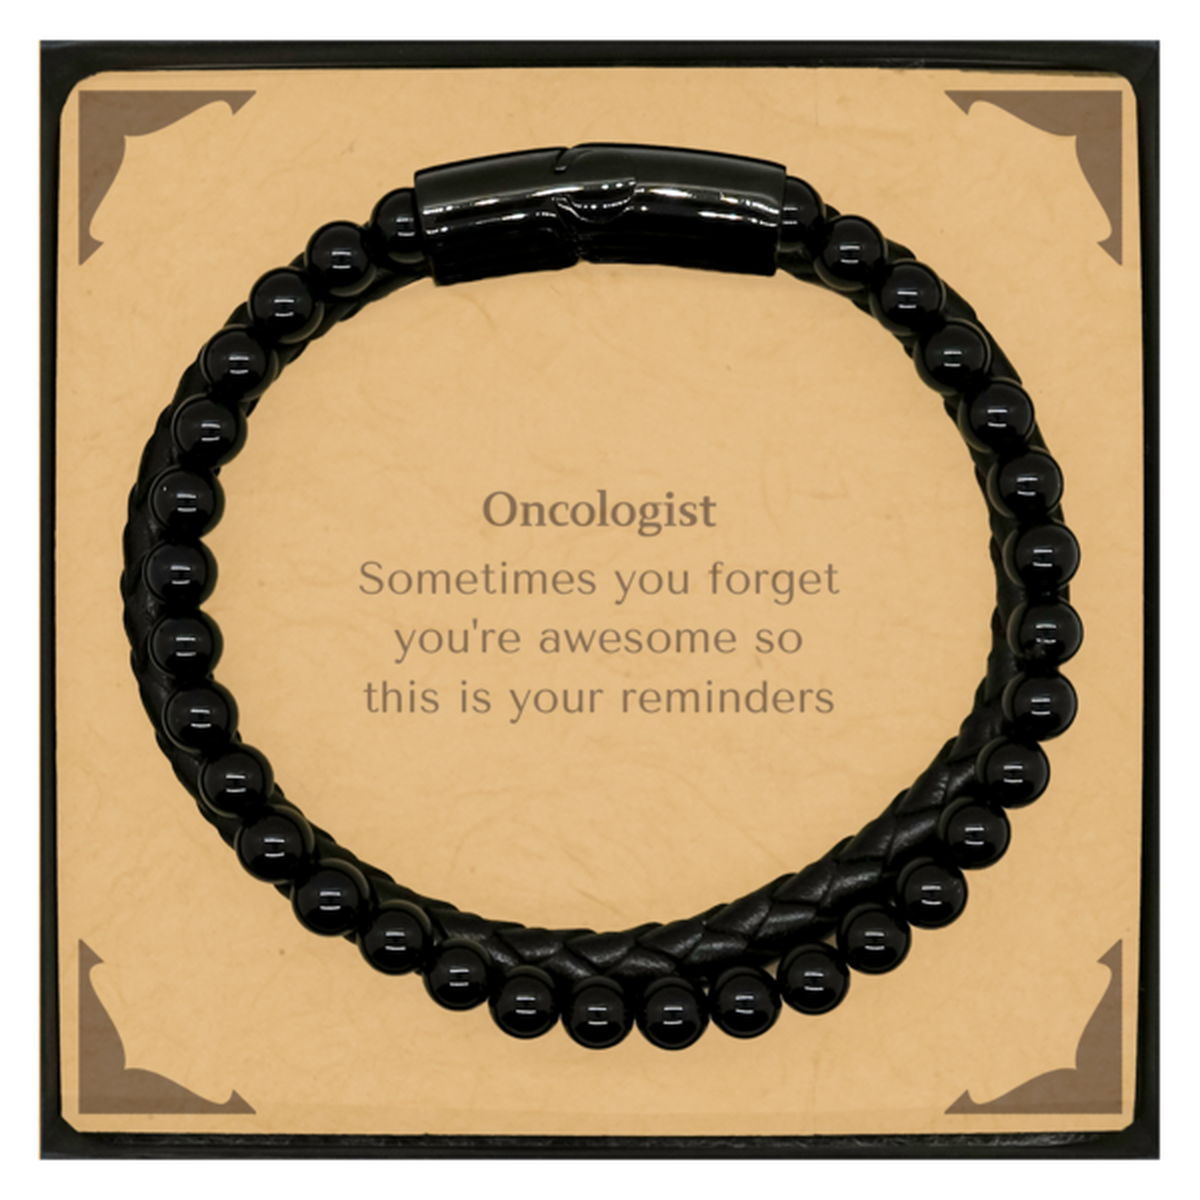 Sentimental Oncologist Stone Leather Bracelets, Oncologist Sometimes you forget you're awesome so this is your reminders, Graduation Christmas Birthday Gifts for Oncologist, Men, Women, Coworkers